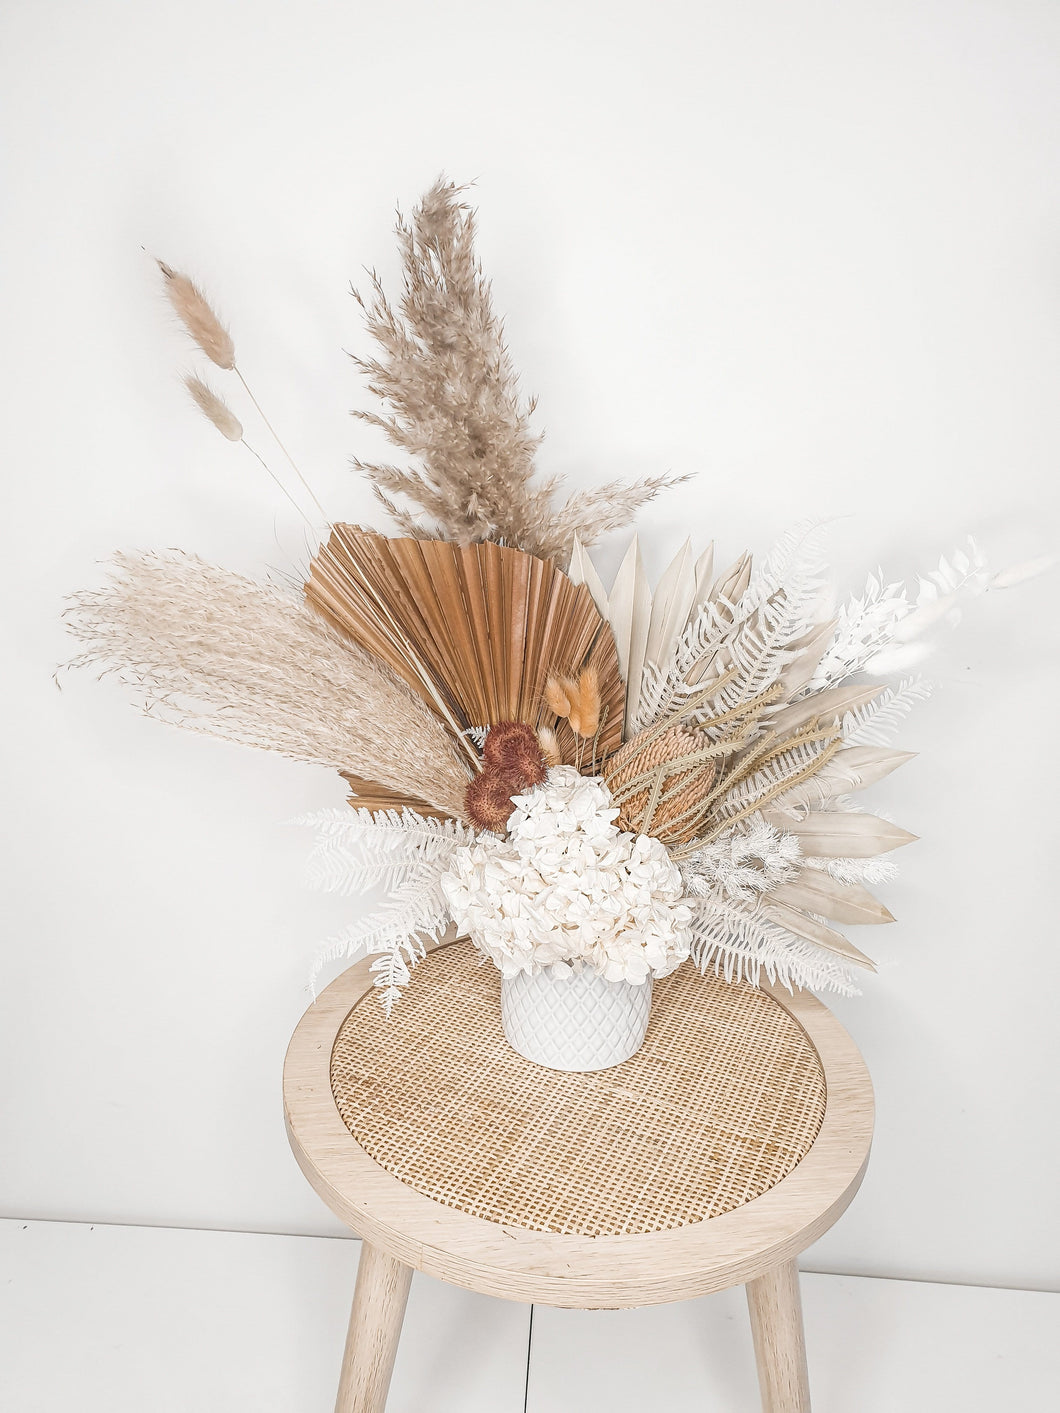 Earthy raw tones of dried floral arrangement- Sandy cliffs dried potted bunch